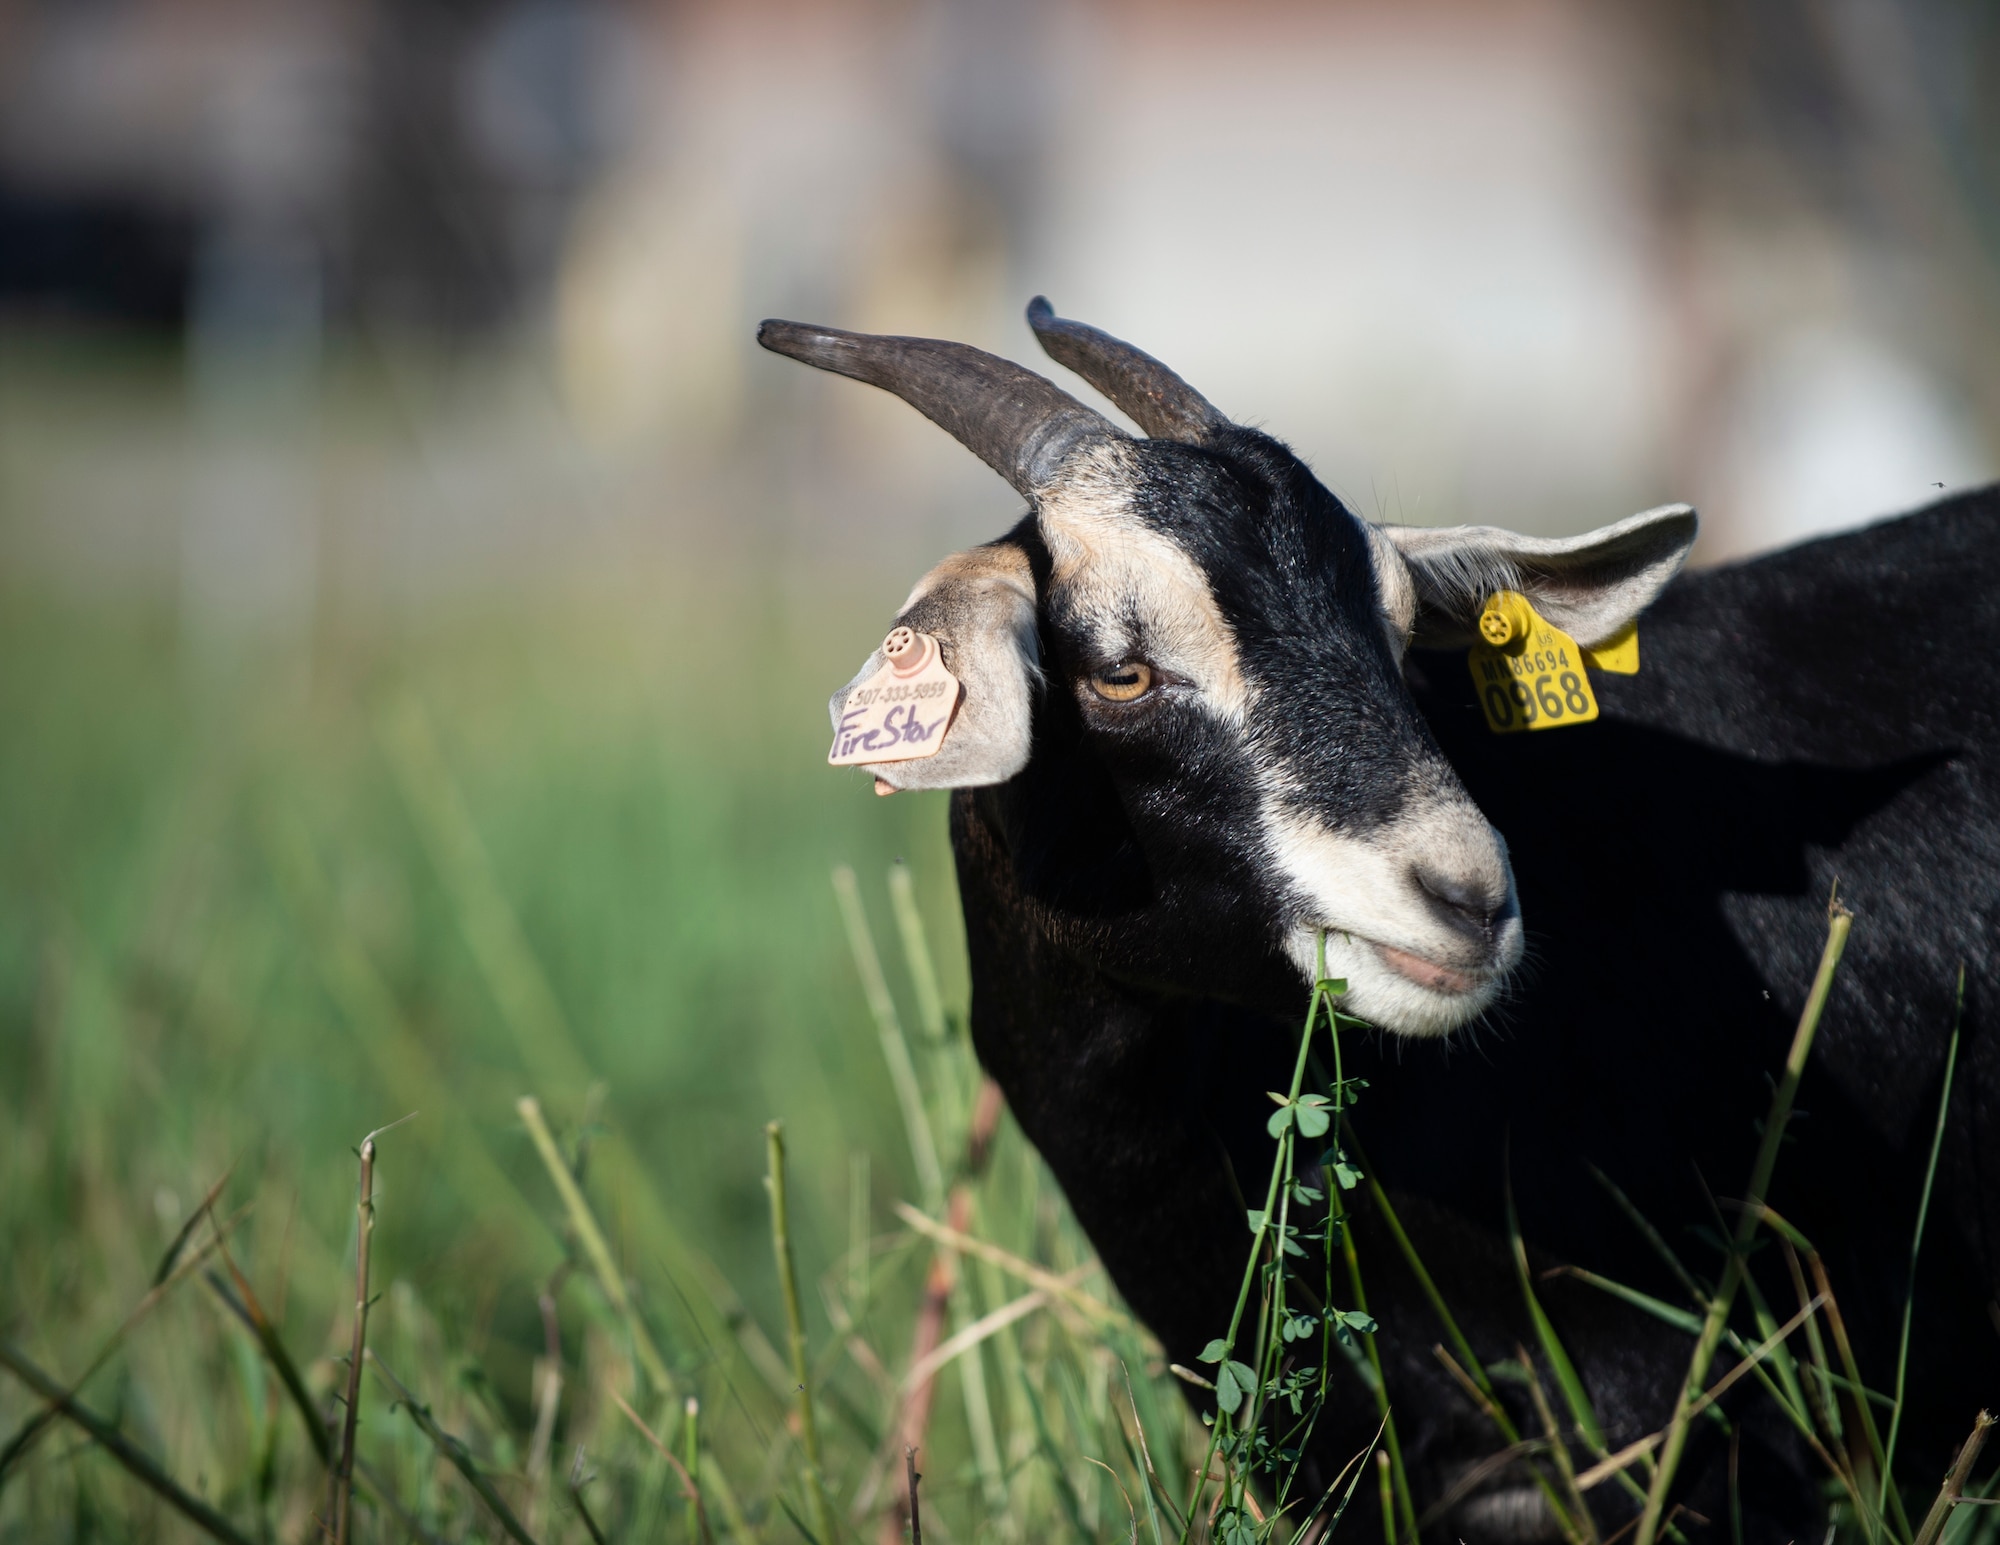 More than 27 goats returned to maintain the natural prairie grass restoration project at the 133rd Airlift Wing in St. Paul, Minn., July 14, 2022. The goats provide the essential maintenance that a natural setting requires in the most ecologically friendly way.